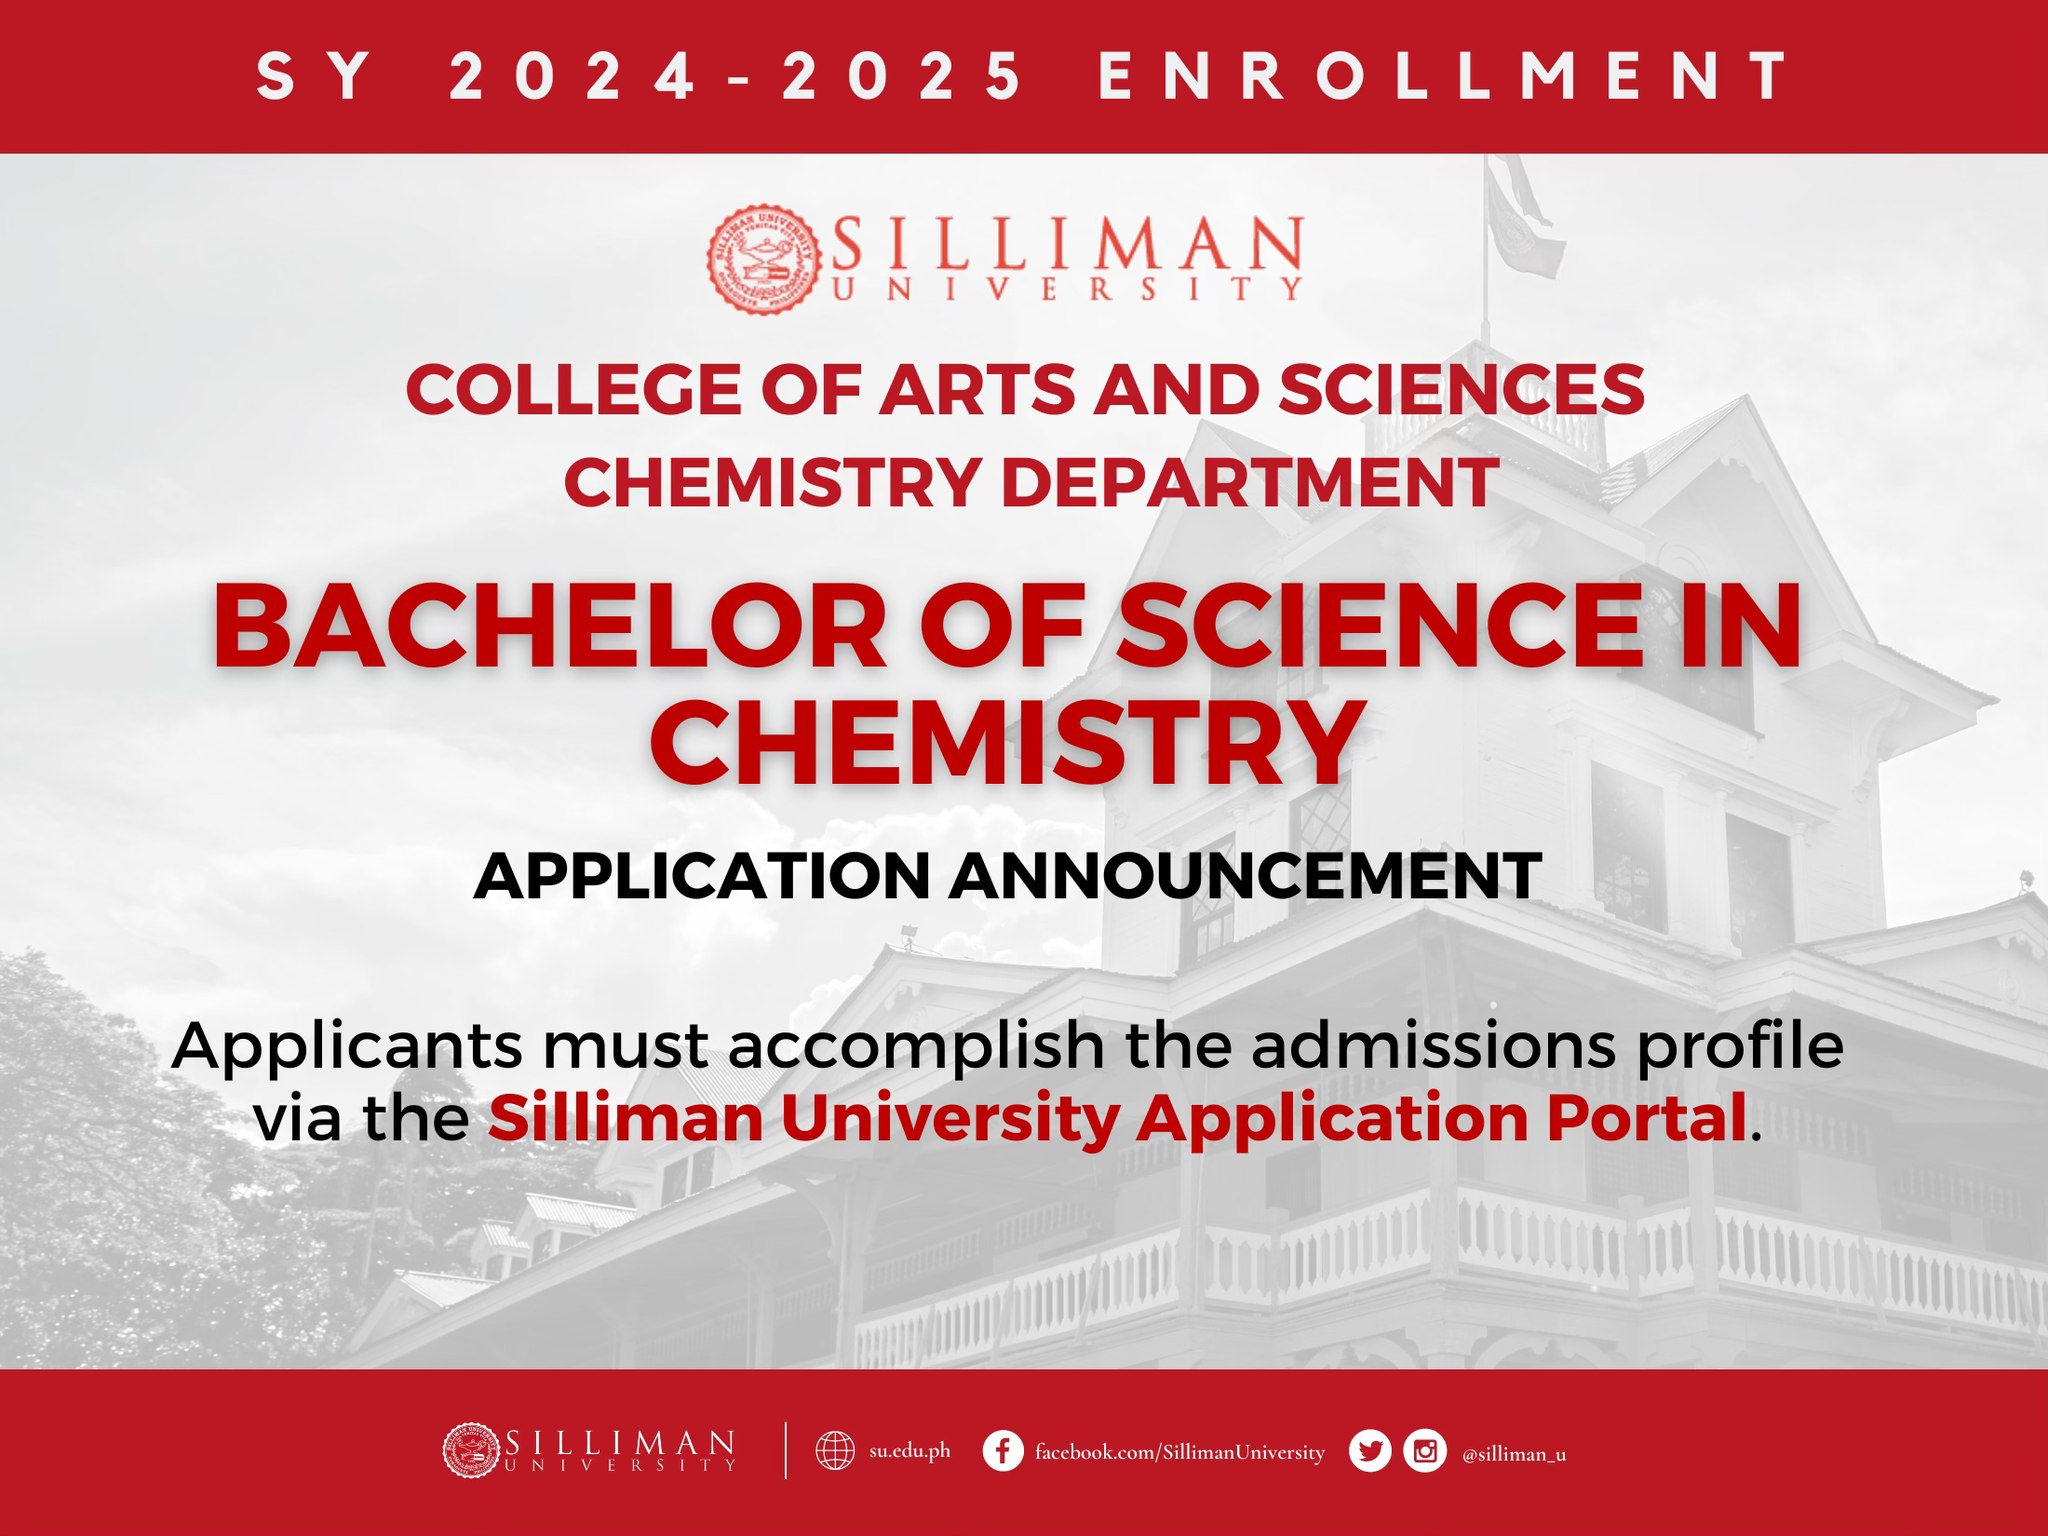 College of Arts and Sciences – Chemistry Department is now accepting Bachelor of Science in Chemistry applications for SY 2024-2025